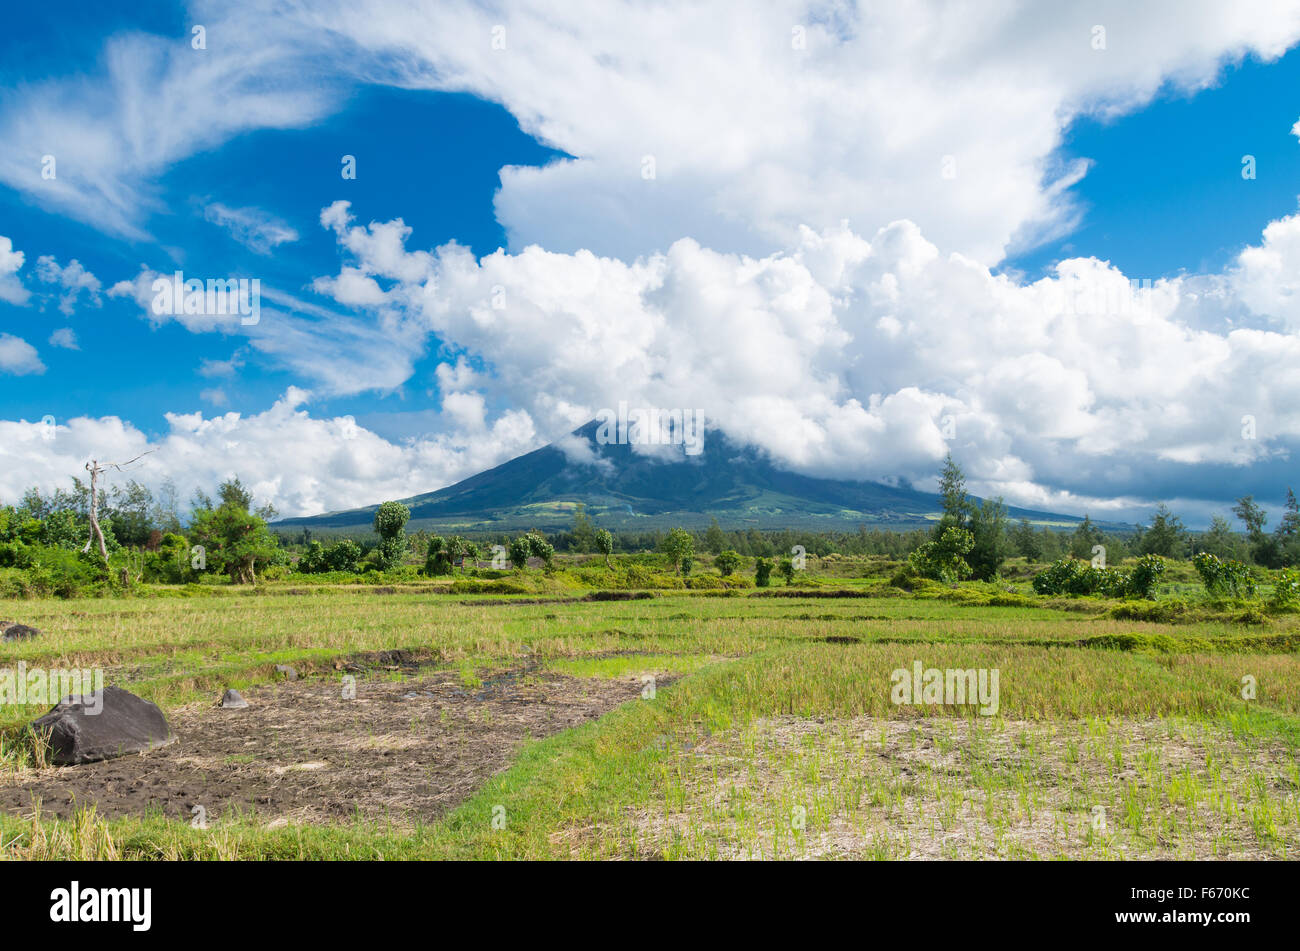 Mayon is a classic stratovolcano (composite) type of volcano with a small central summit crater. The cone is considered the worl Stock Photo